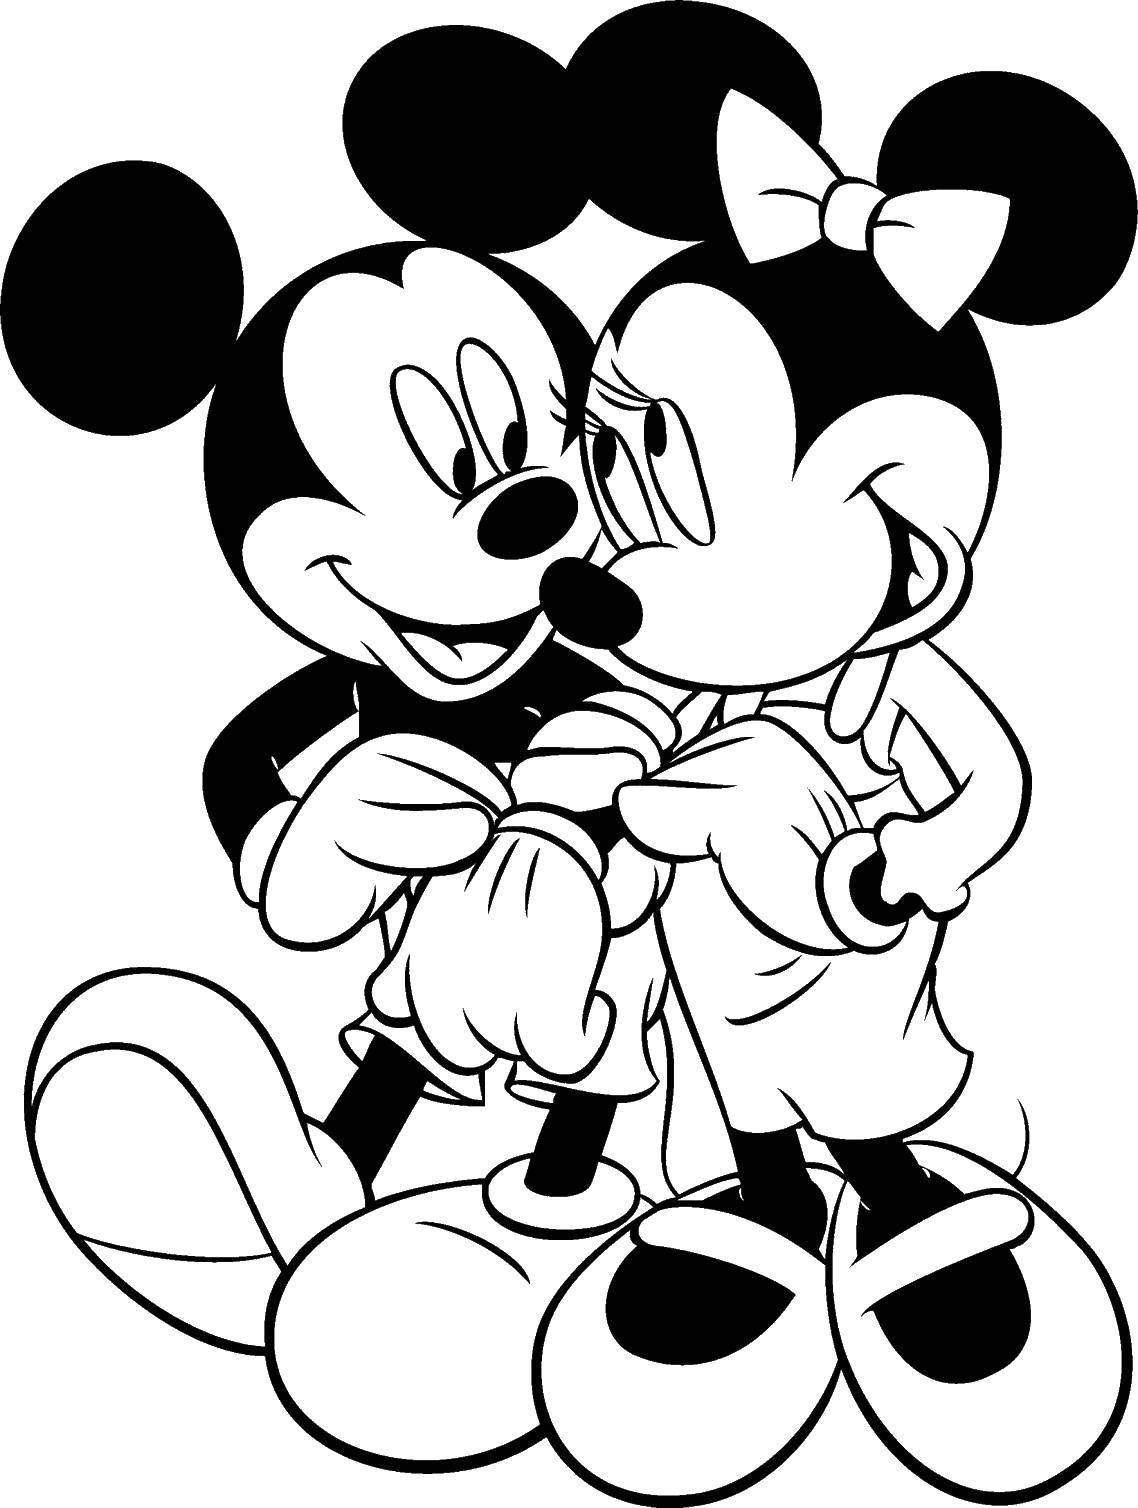 Coloring The love between Mickey and Minnie. Category Disney coloring pages. Tags:  Disney, Mickey Mouse, Minnie Mouse.